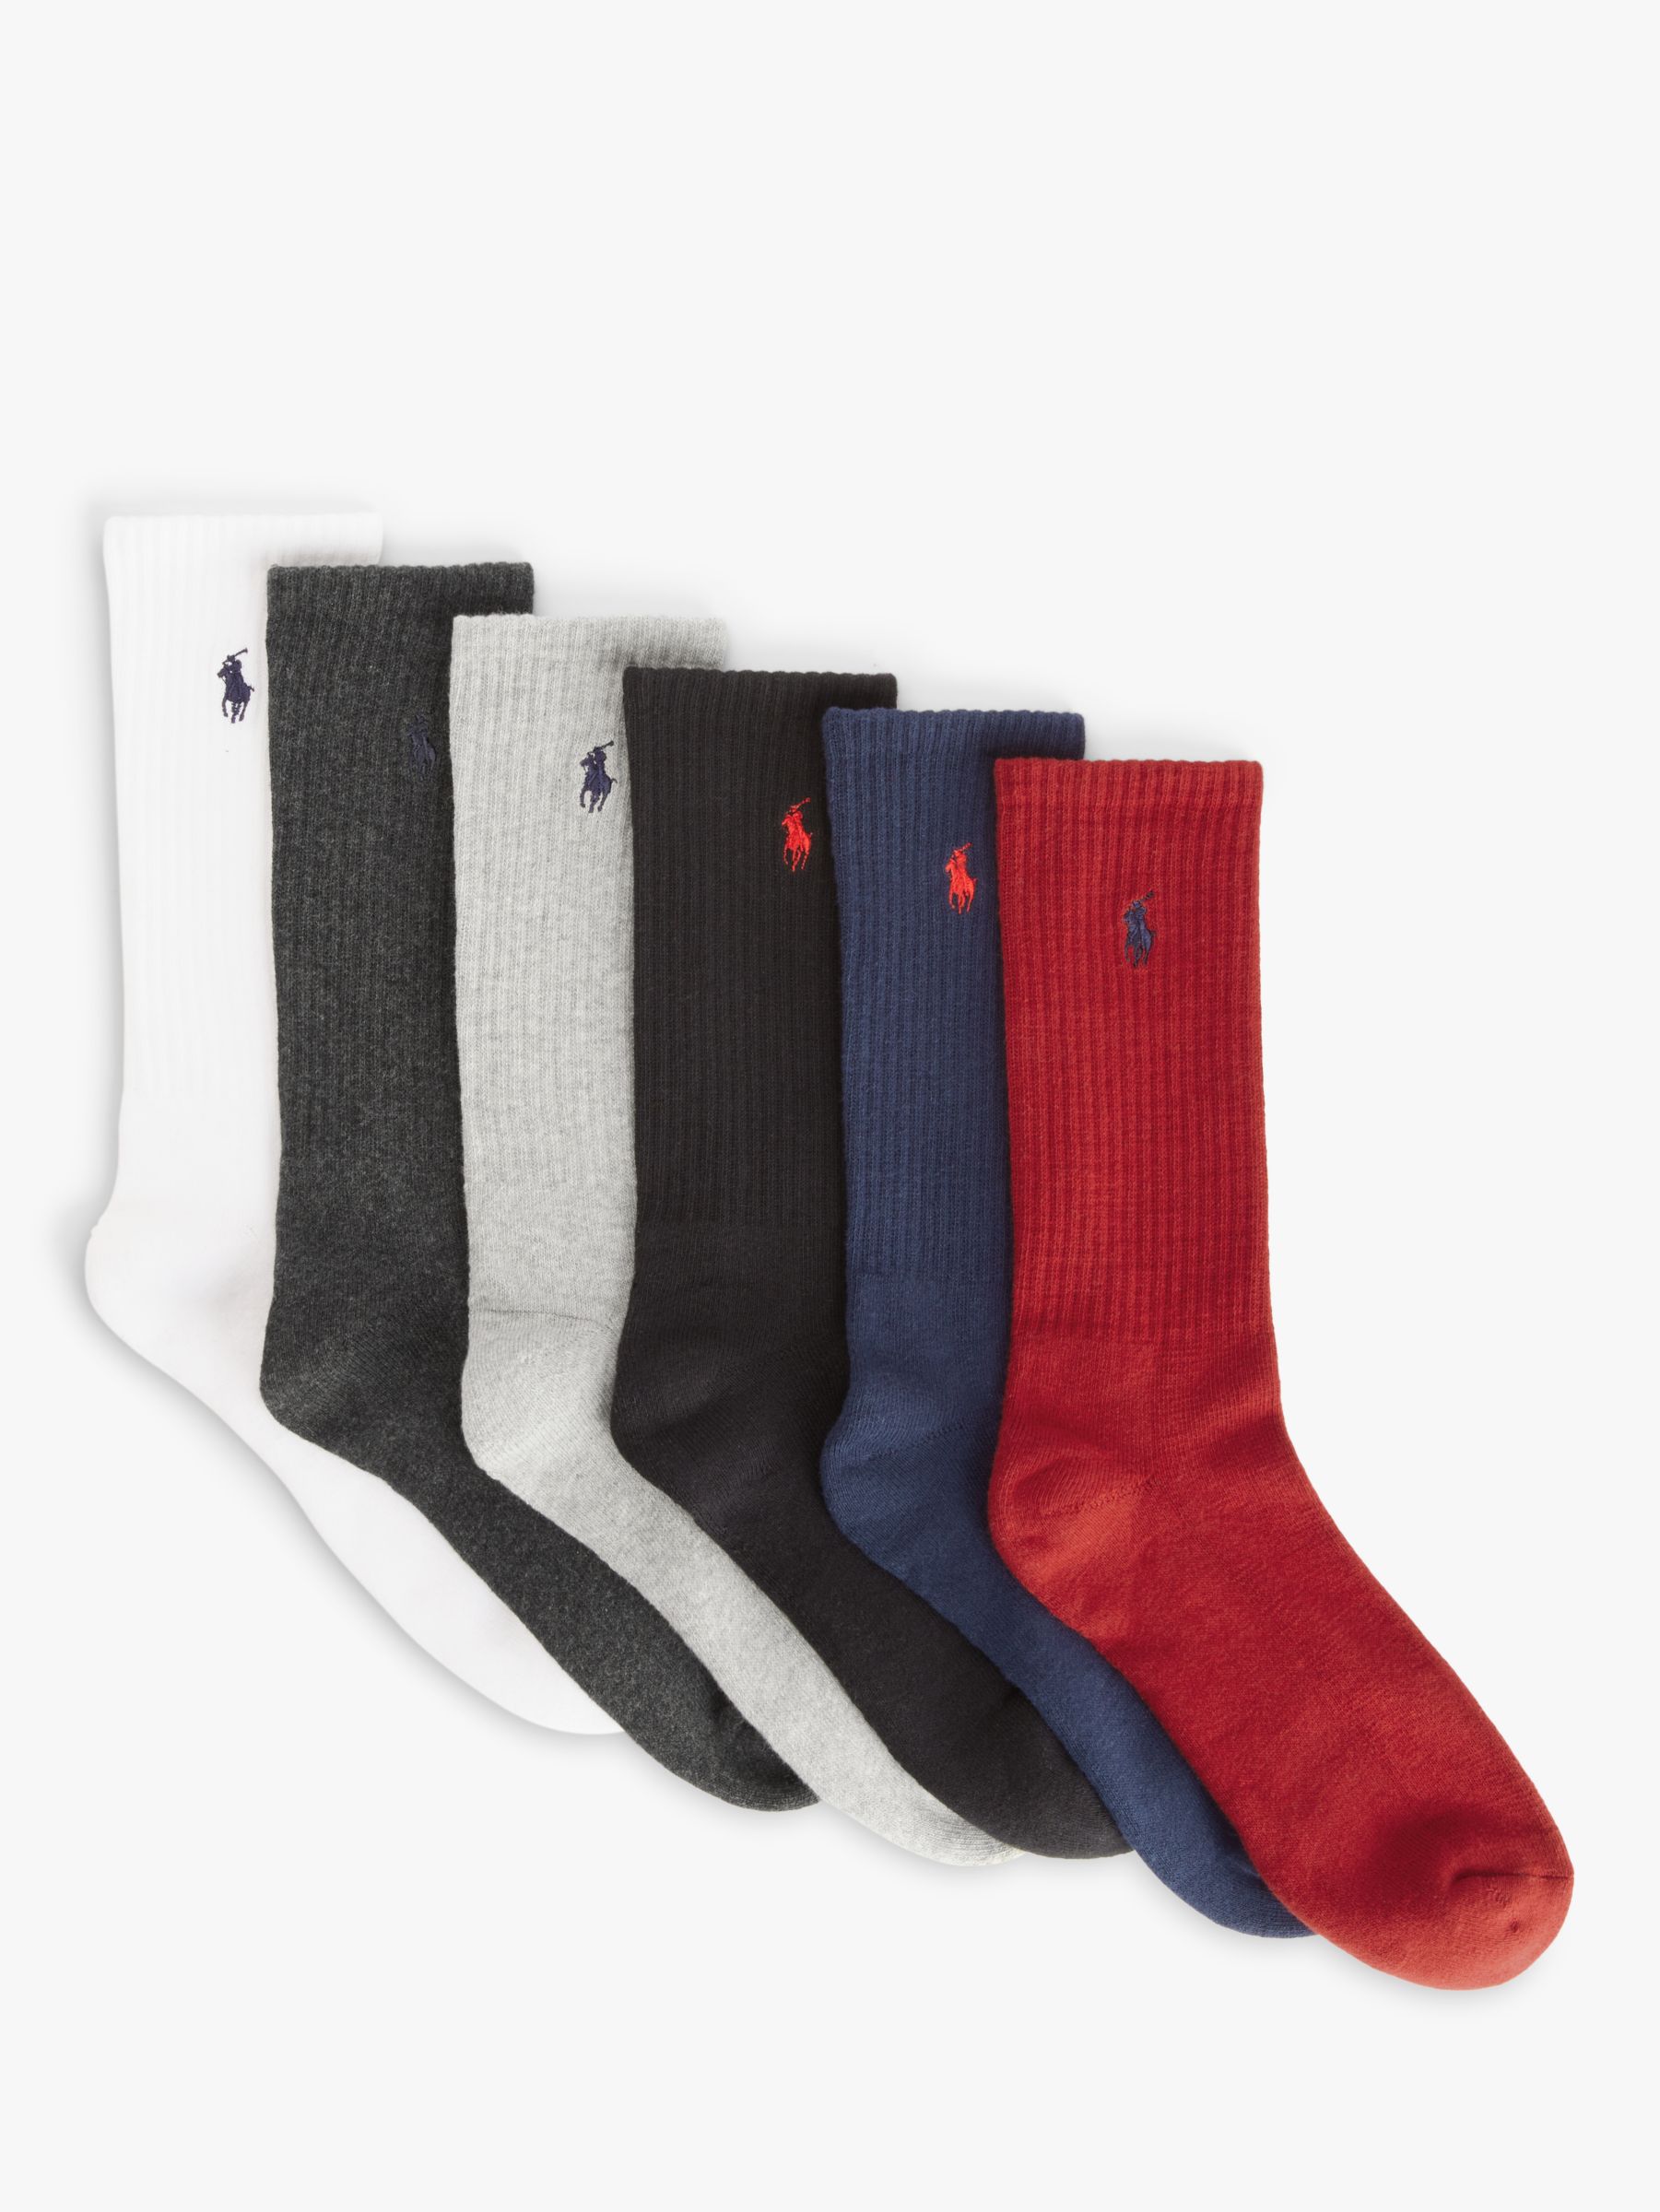 Buy Polo Ralph Lauren Cotton Blend Crew Socks, One Size, Pack of 6, Multi Online at johnlewis.com